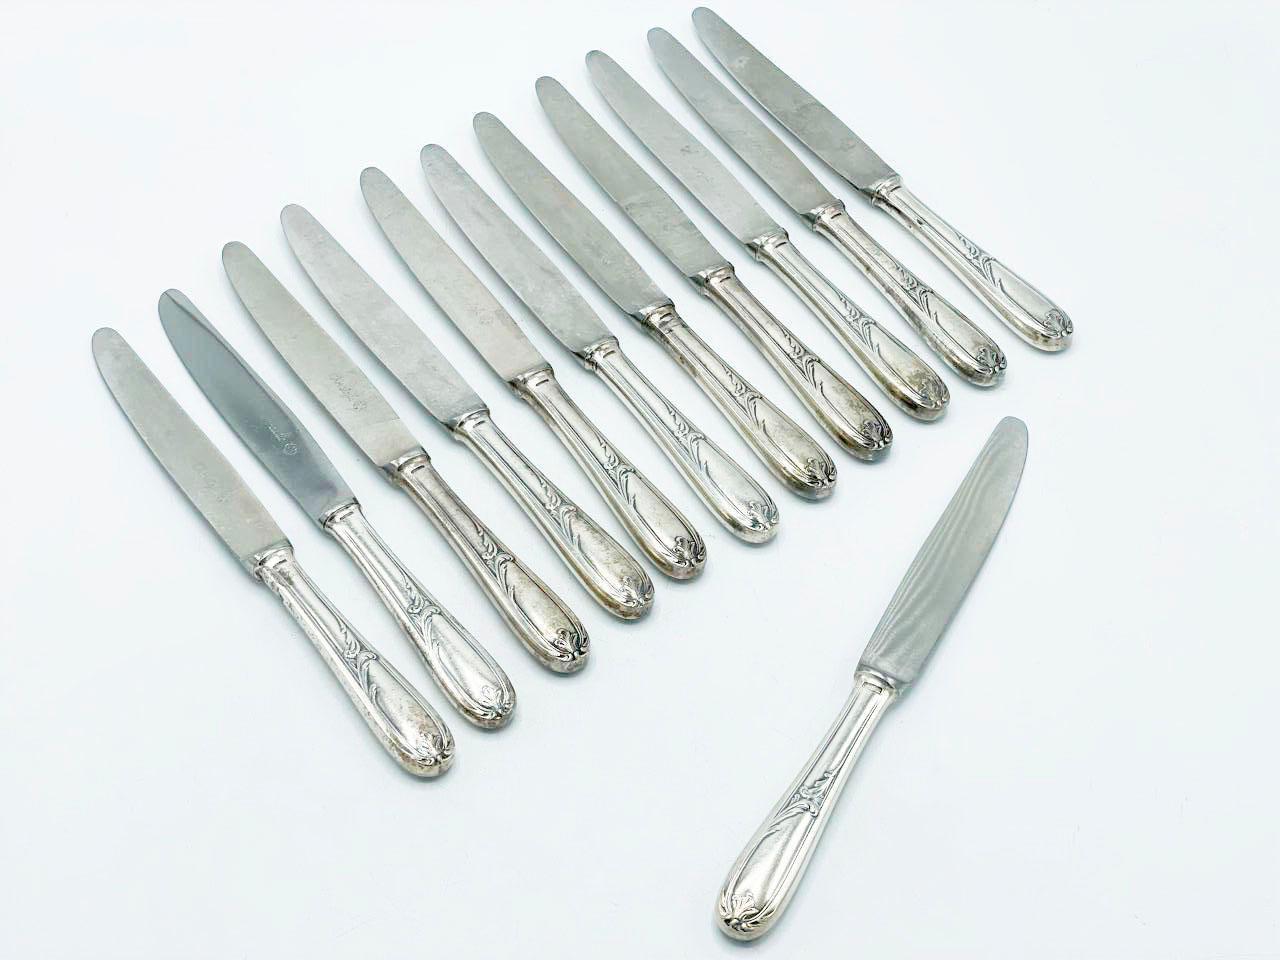 Christofle Made in Argentina, Flatware art nouveau in Silverplated In Good Condition For Sale In Autonomous City Buenos Aires, CABA